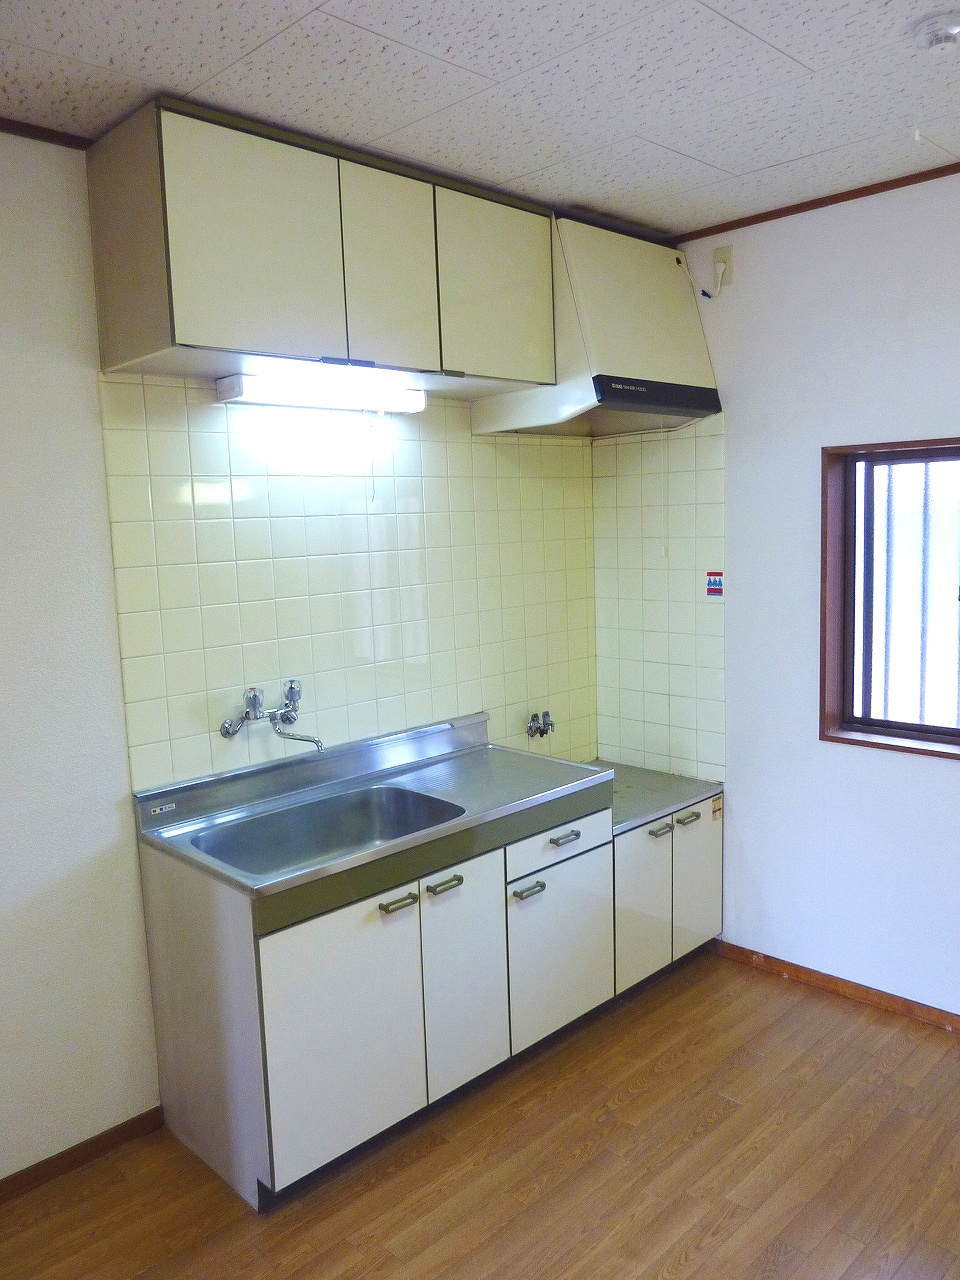 Kitchen. It is a kitchen with a small window